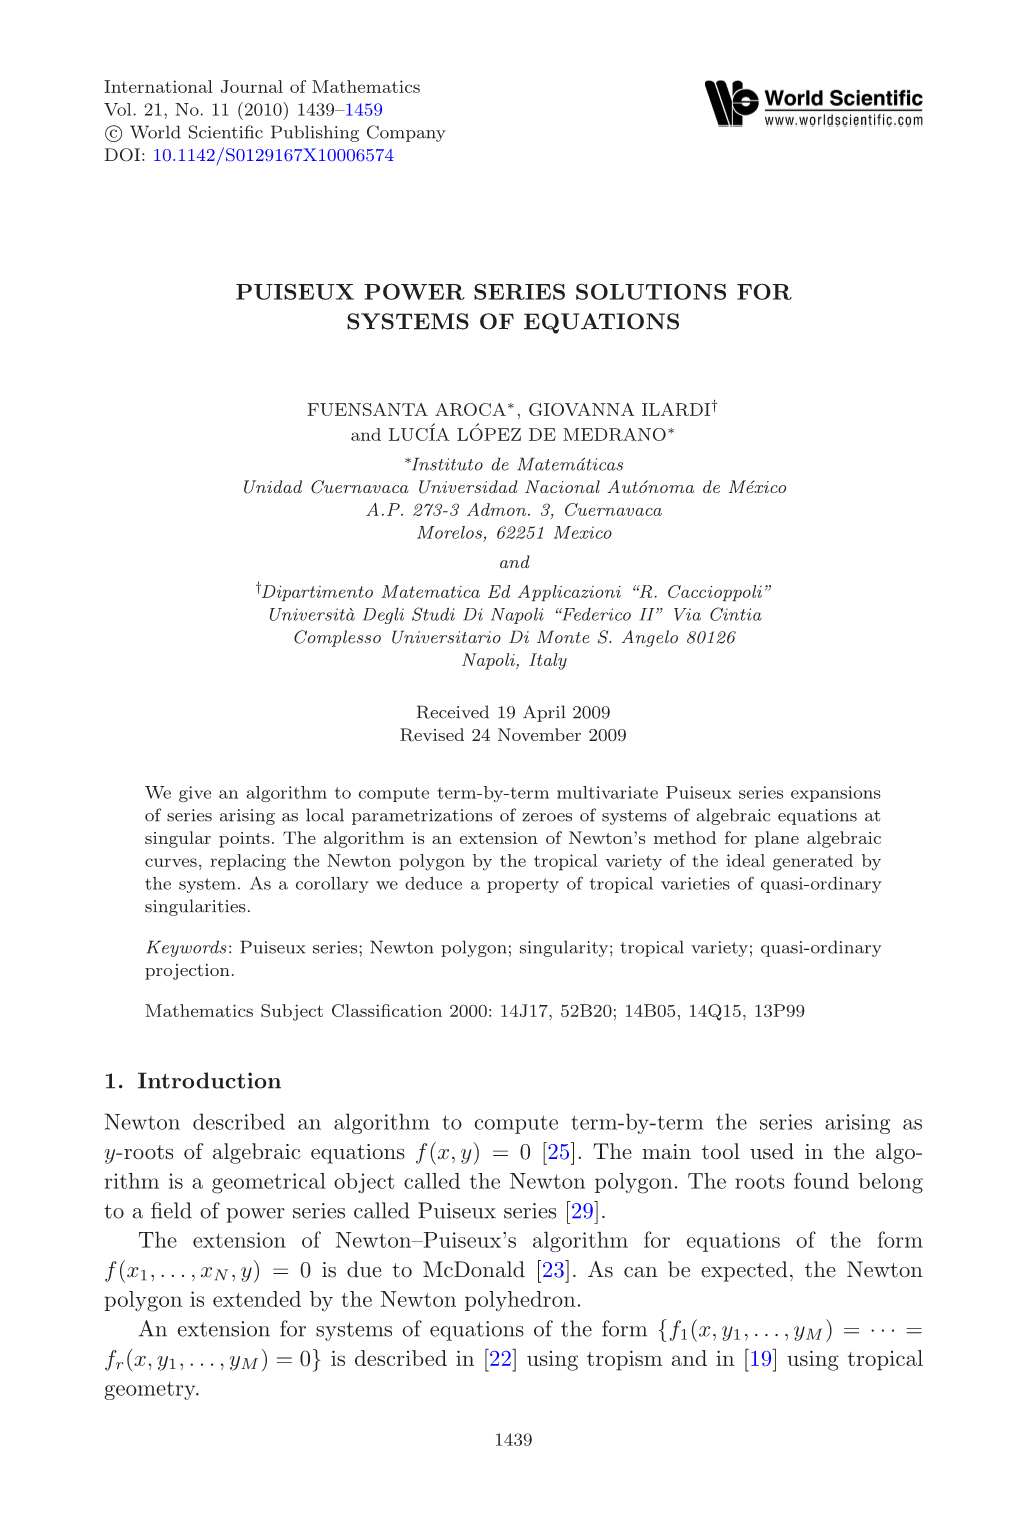 Puiseux Power Series Solutions for Systems of Equations